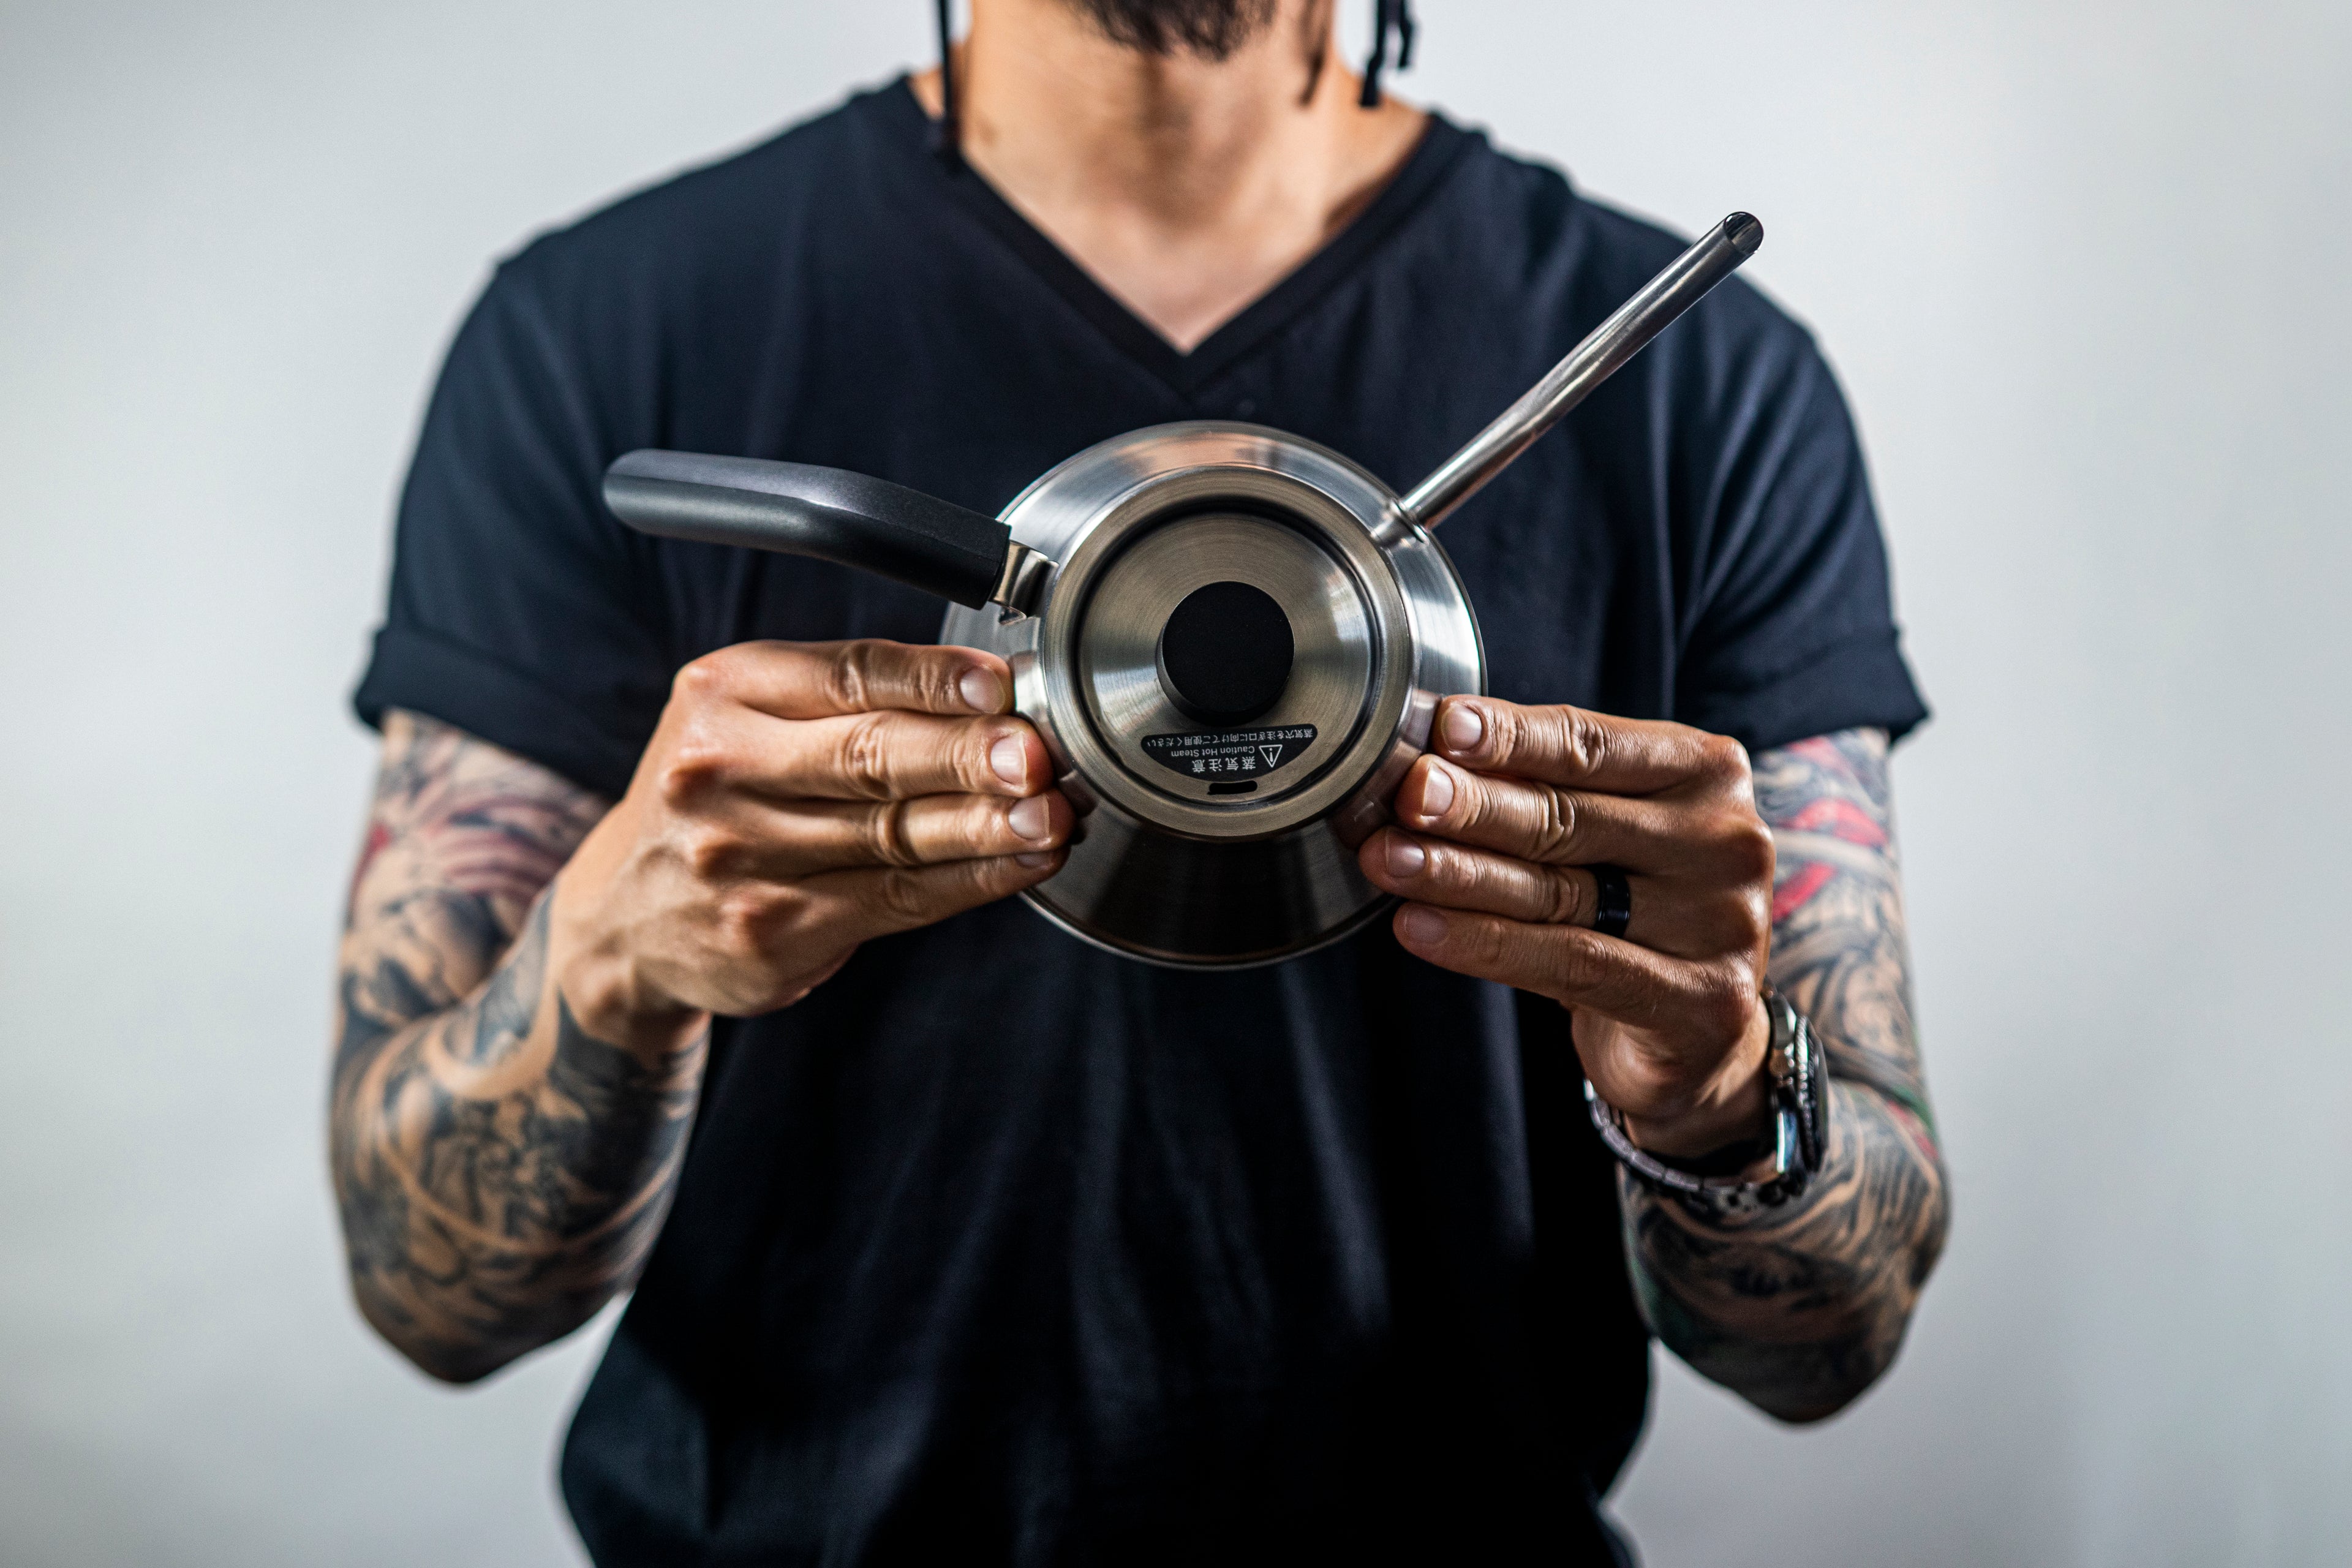 Model in a black t-shirt, with sleeve tattoos, holding a silver stainless steel kettle with black plastic handle and short cylindrical black plastic lid knob set against a light background. Kettle is positioned in the model&